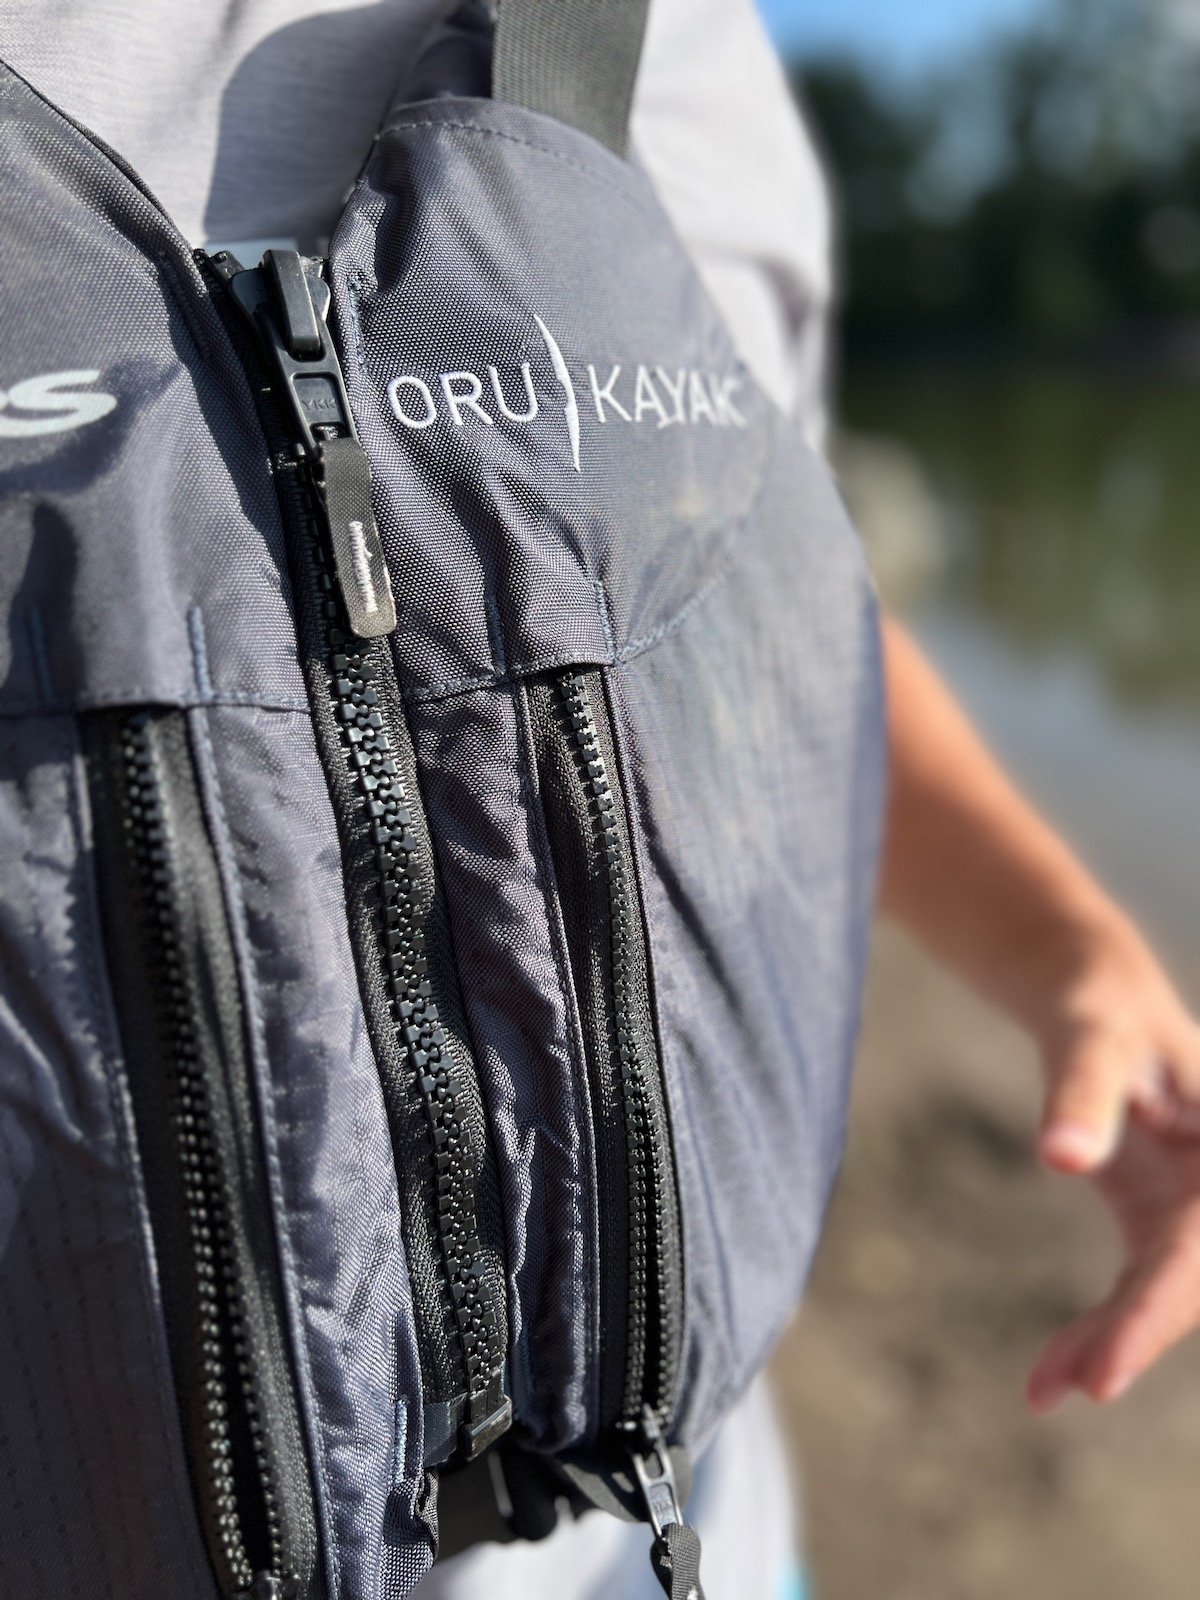 Oru PFD: Why it’s a gold standard for flatwater kayak safety